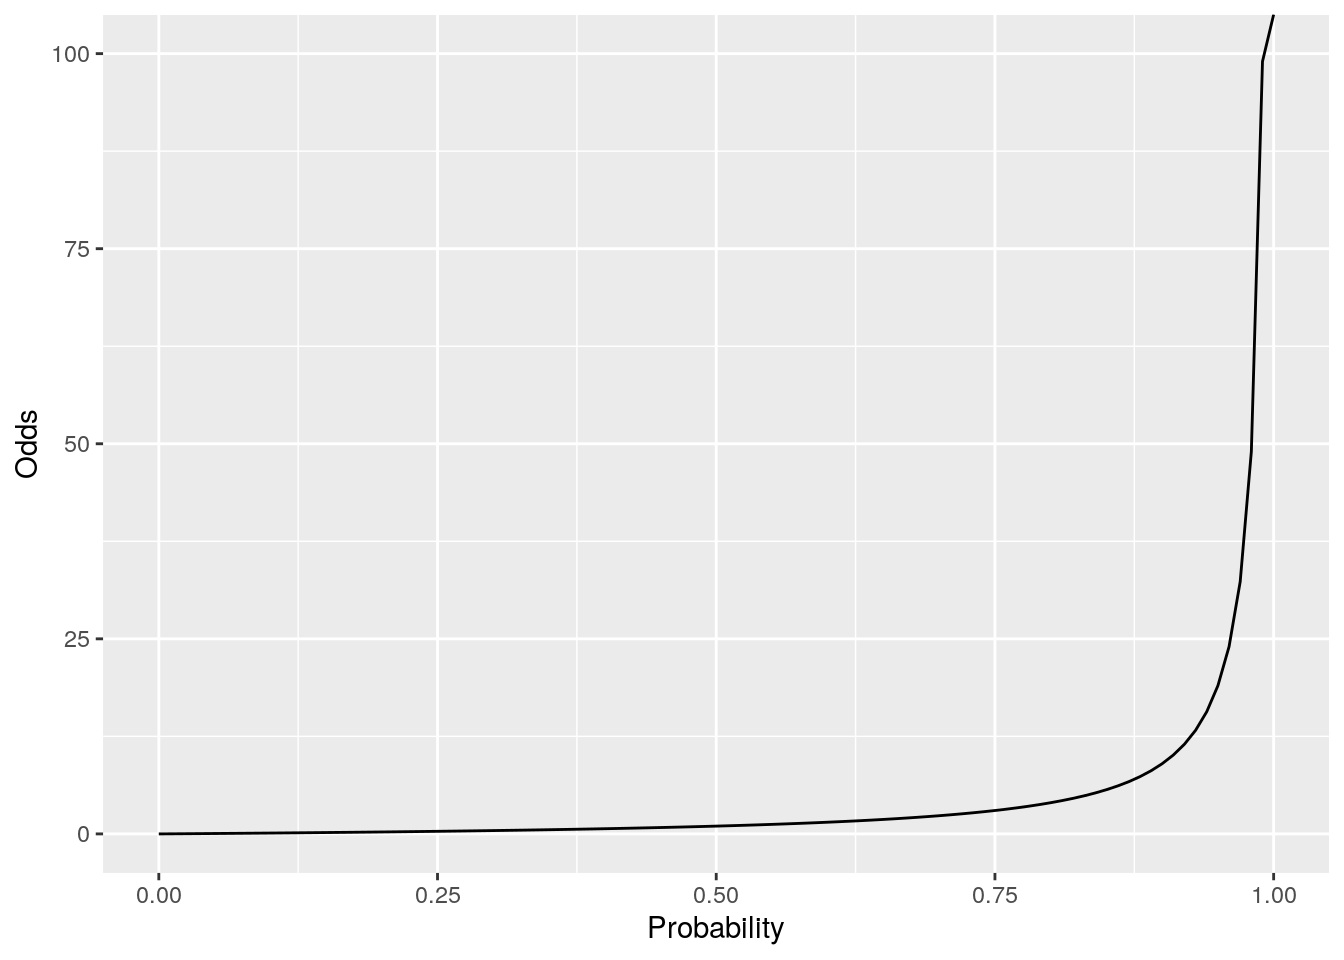 Odds plotted against probability